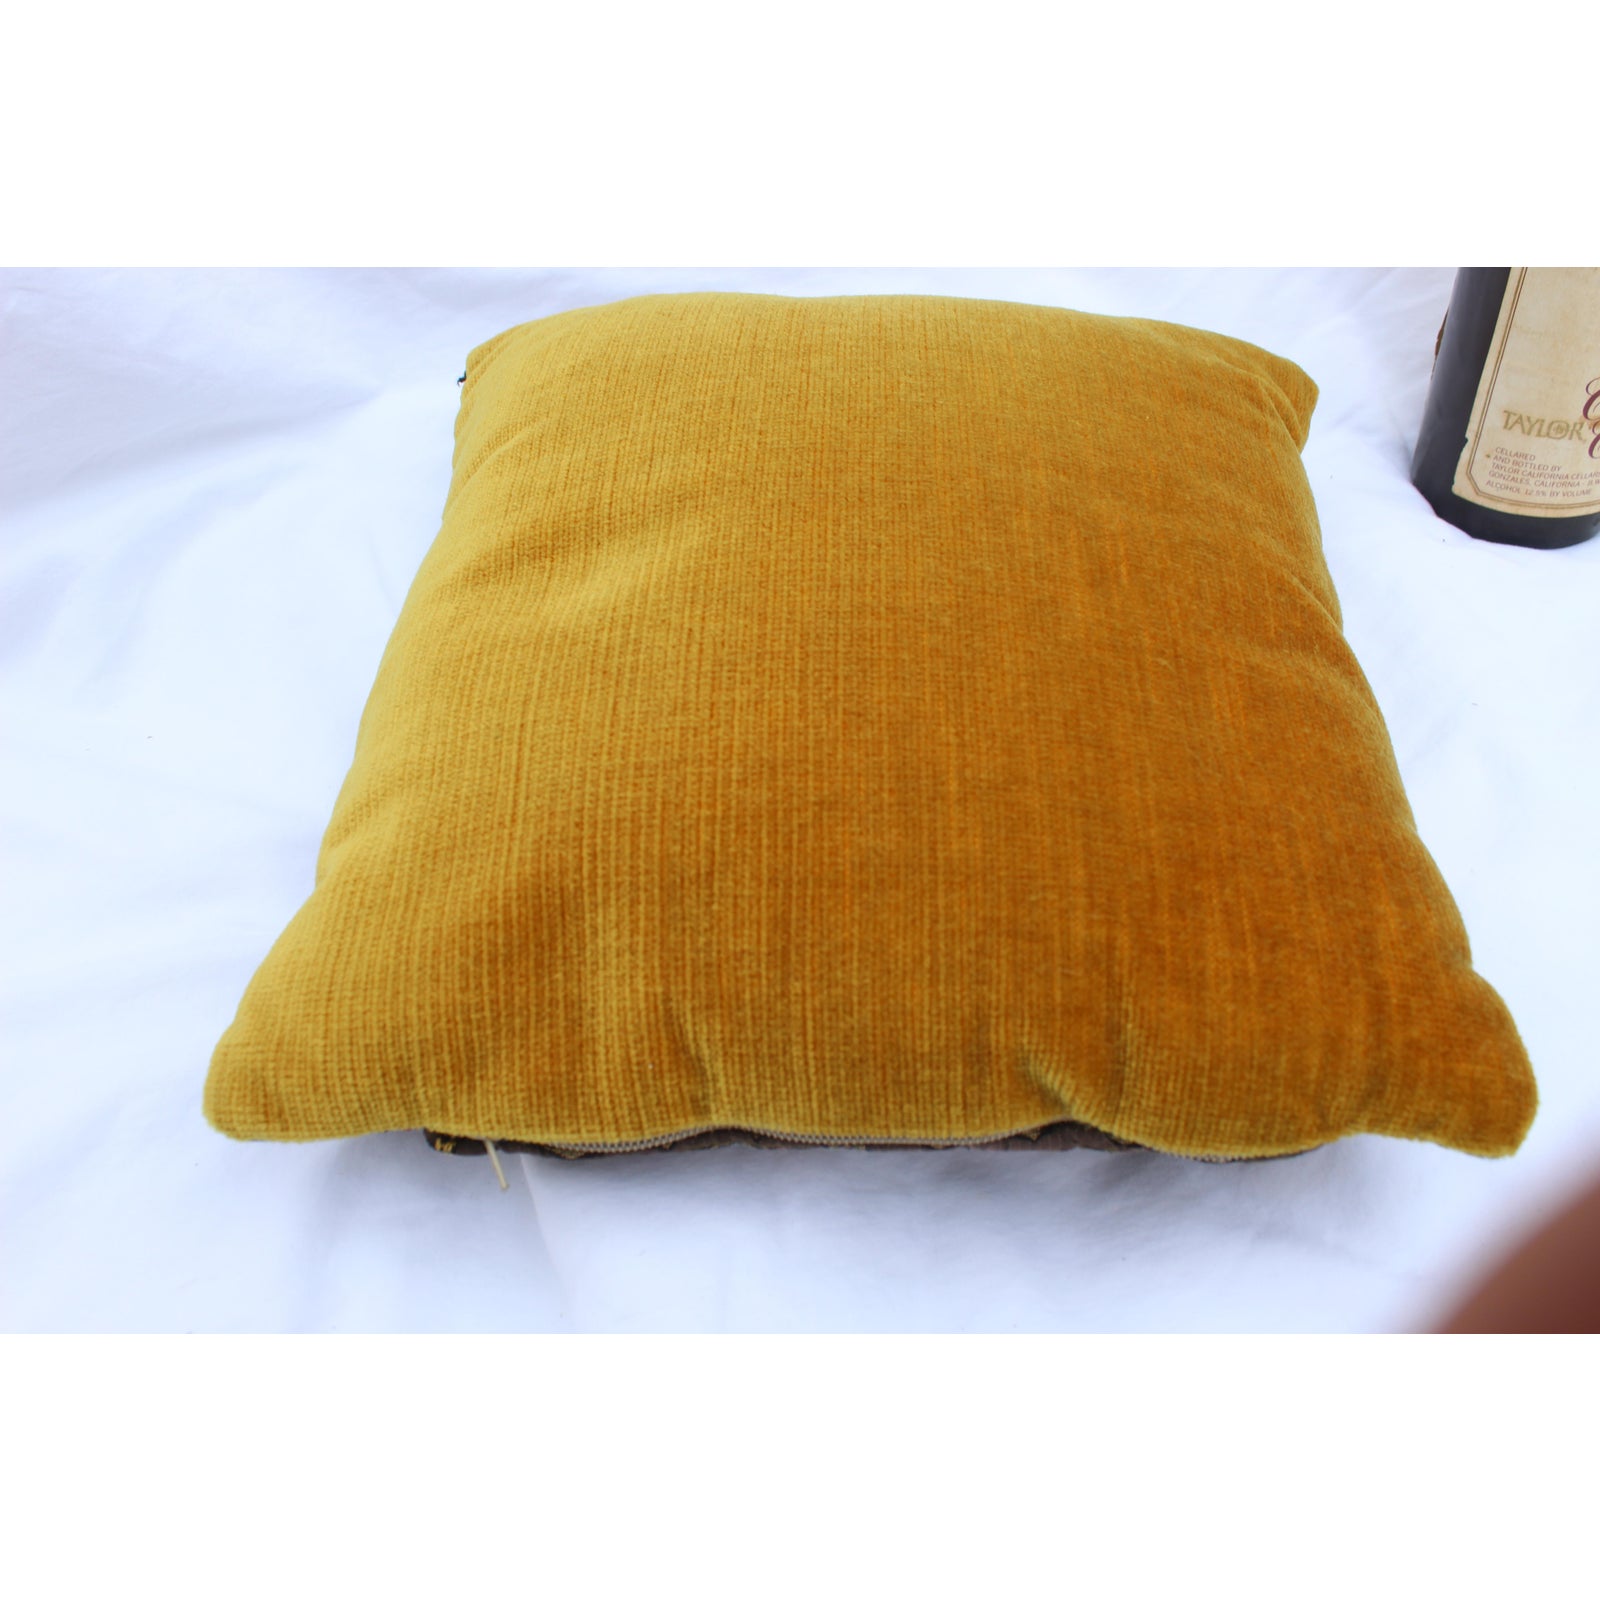 20th-century-renaissance-style-firm-support-pillow-4489